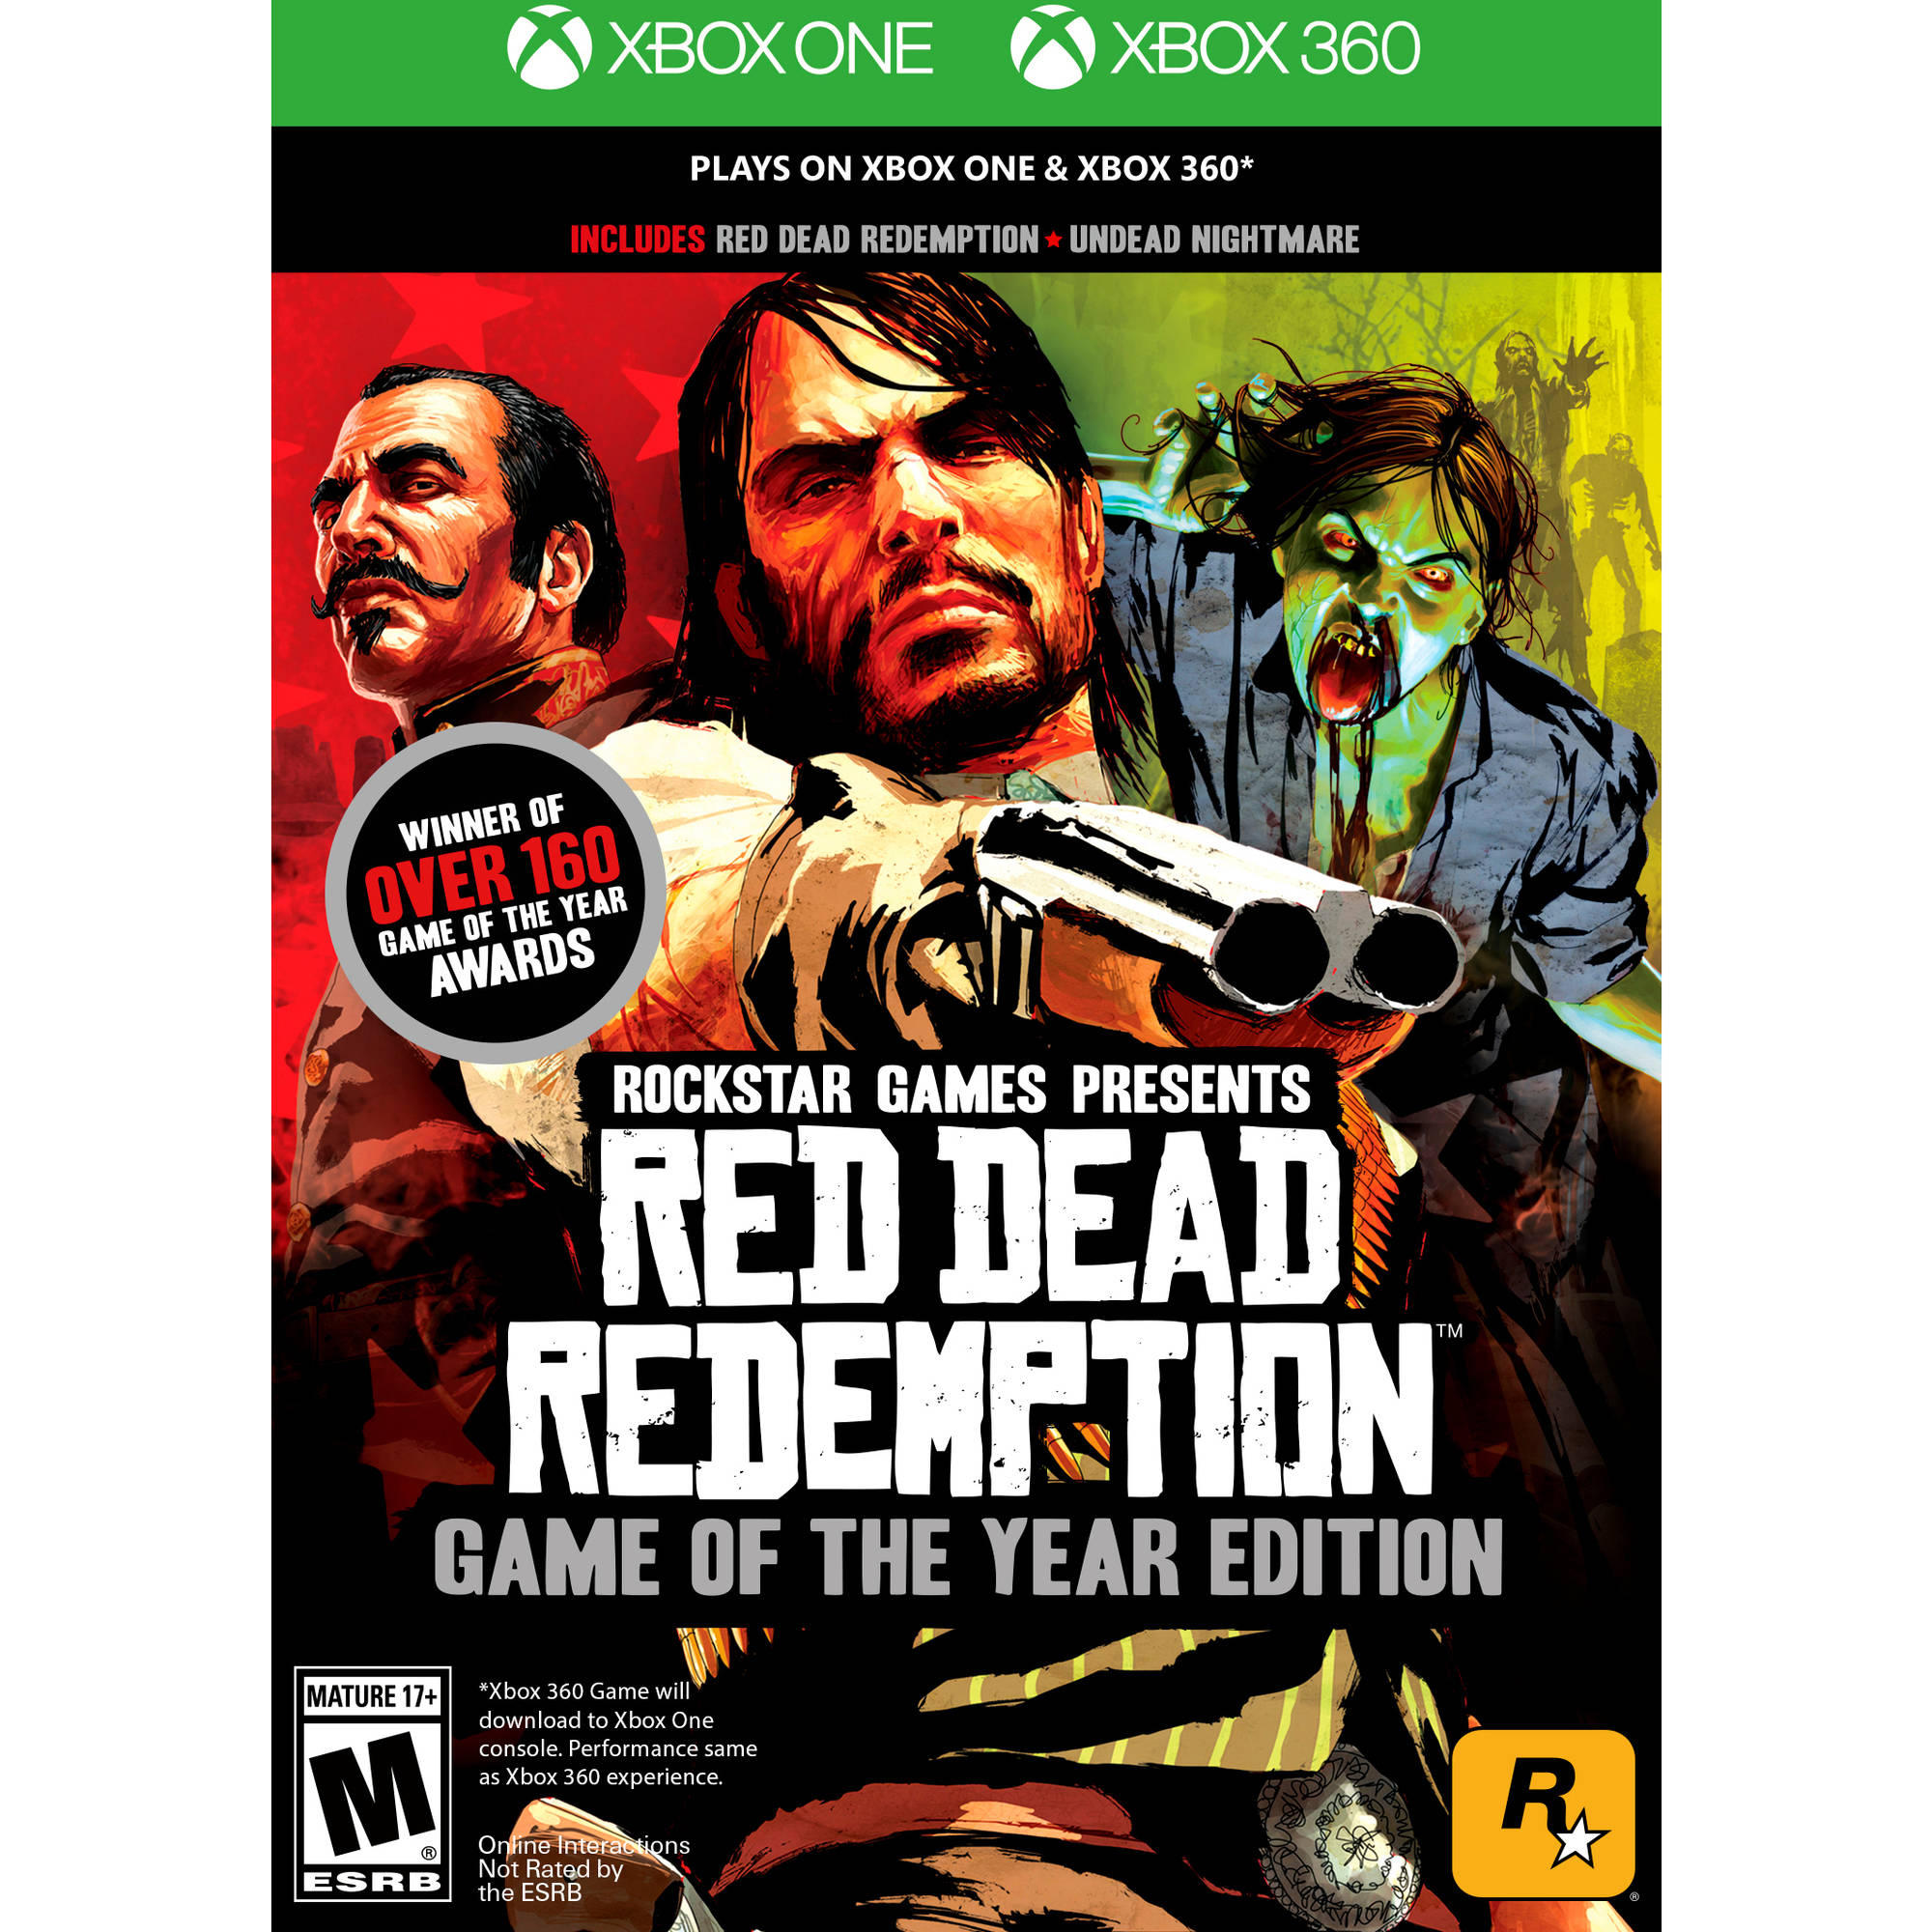 Red Dead Redemption: Game of the Year Edition, Rockstar Games, Xbox One/360, 710425490071 - image 1 of 9